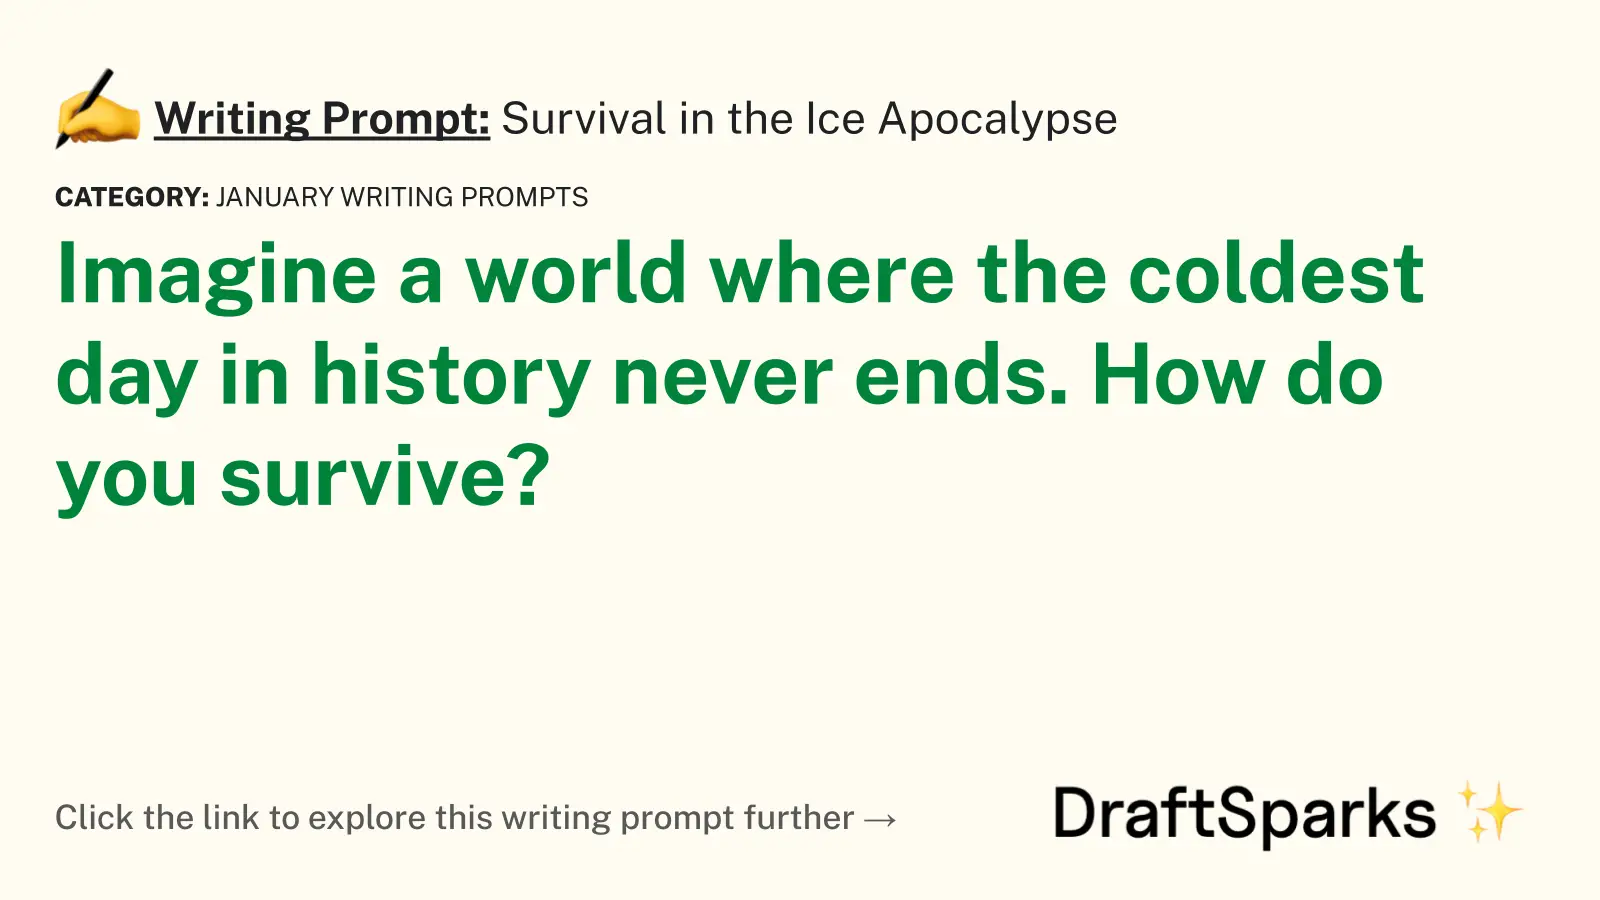 Survival in the Ice Apocalypse